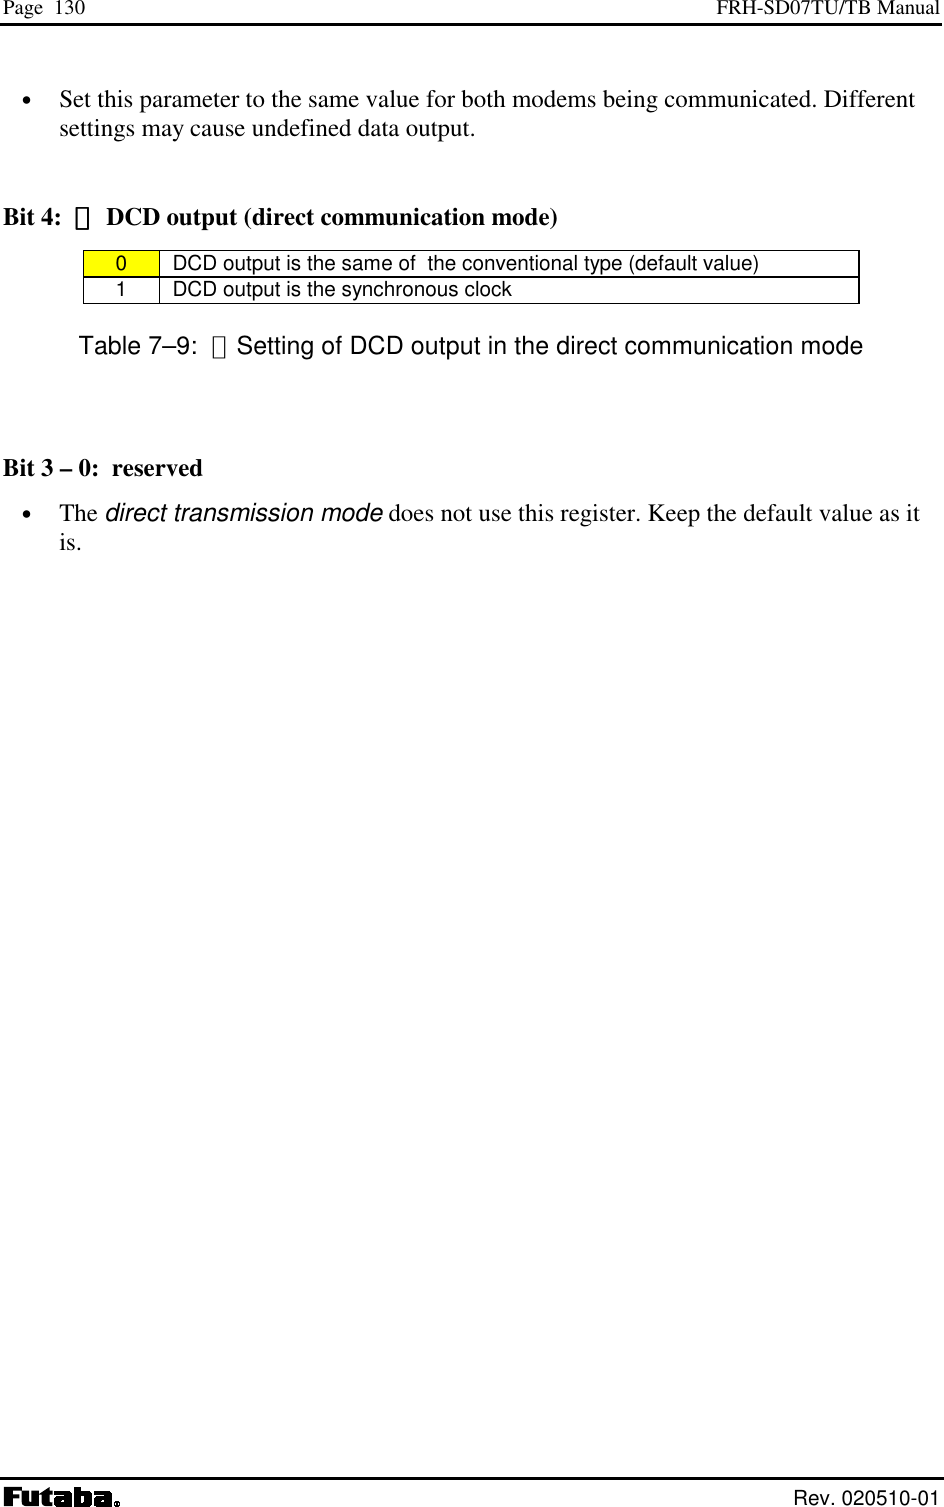 Page  130  FRH-SD07TU/TB Manual  Rev. 020510-01 •  Set this parameter to the same value for both modems being communicated. Different settings may cause undefined data output.  Bit 4:  ：：：： DCD output (direct communication mode) 0   DCD output is the same of  the conventional type (default value) 1   DCD output is the synchronous clock Table 7–9:  ：Setting of DCD output in the direct communication mode  Bit 3 – 0:  reserved •  The direct transmission mode does not use this register. Keep the default value as it is.  